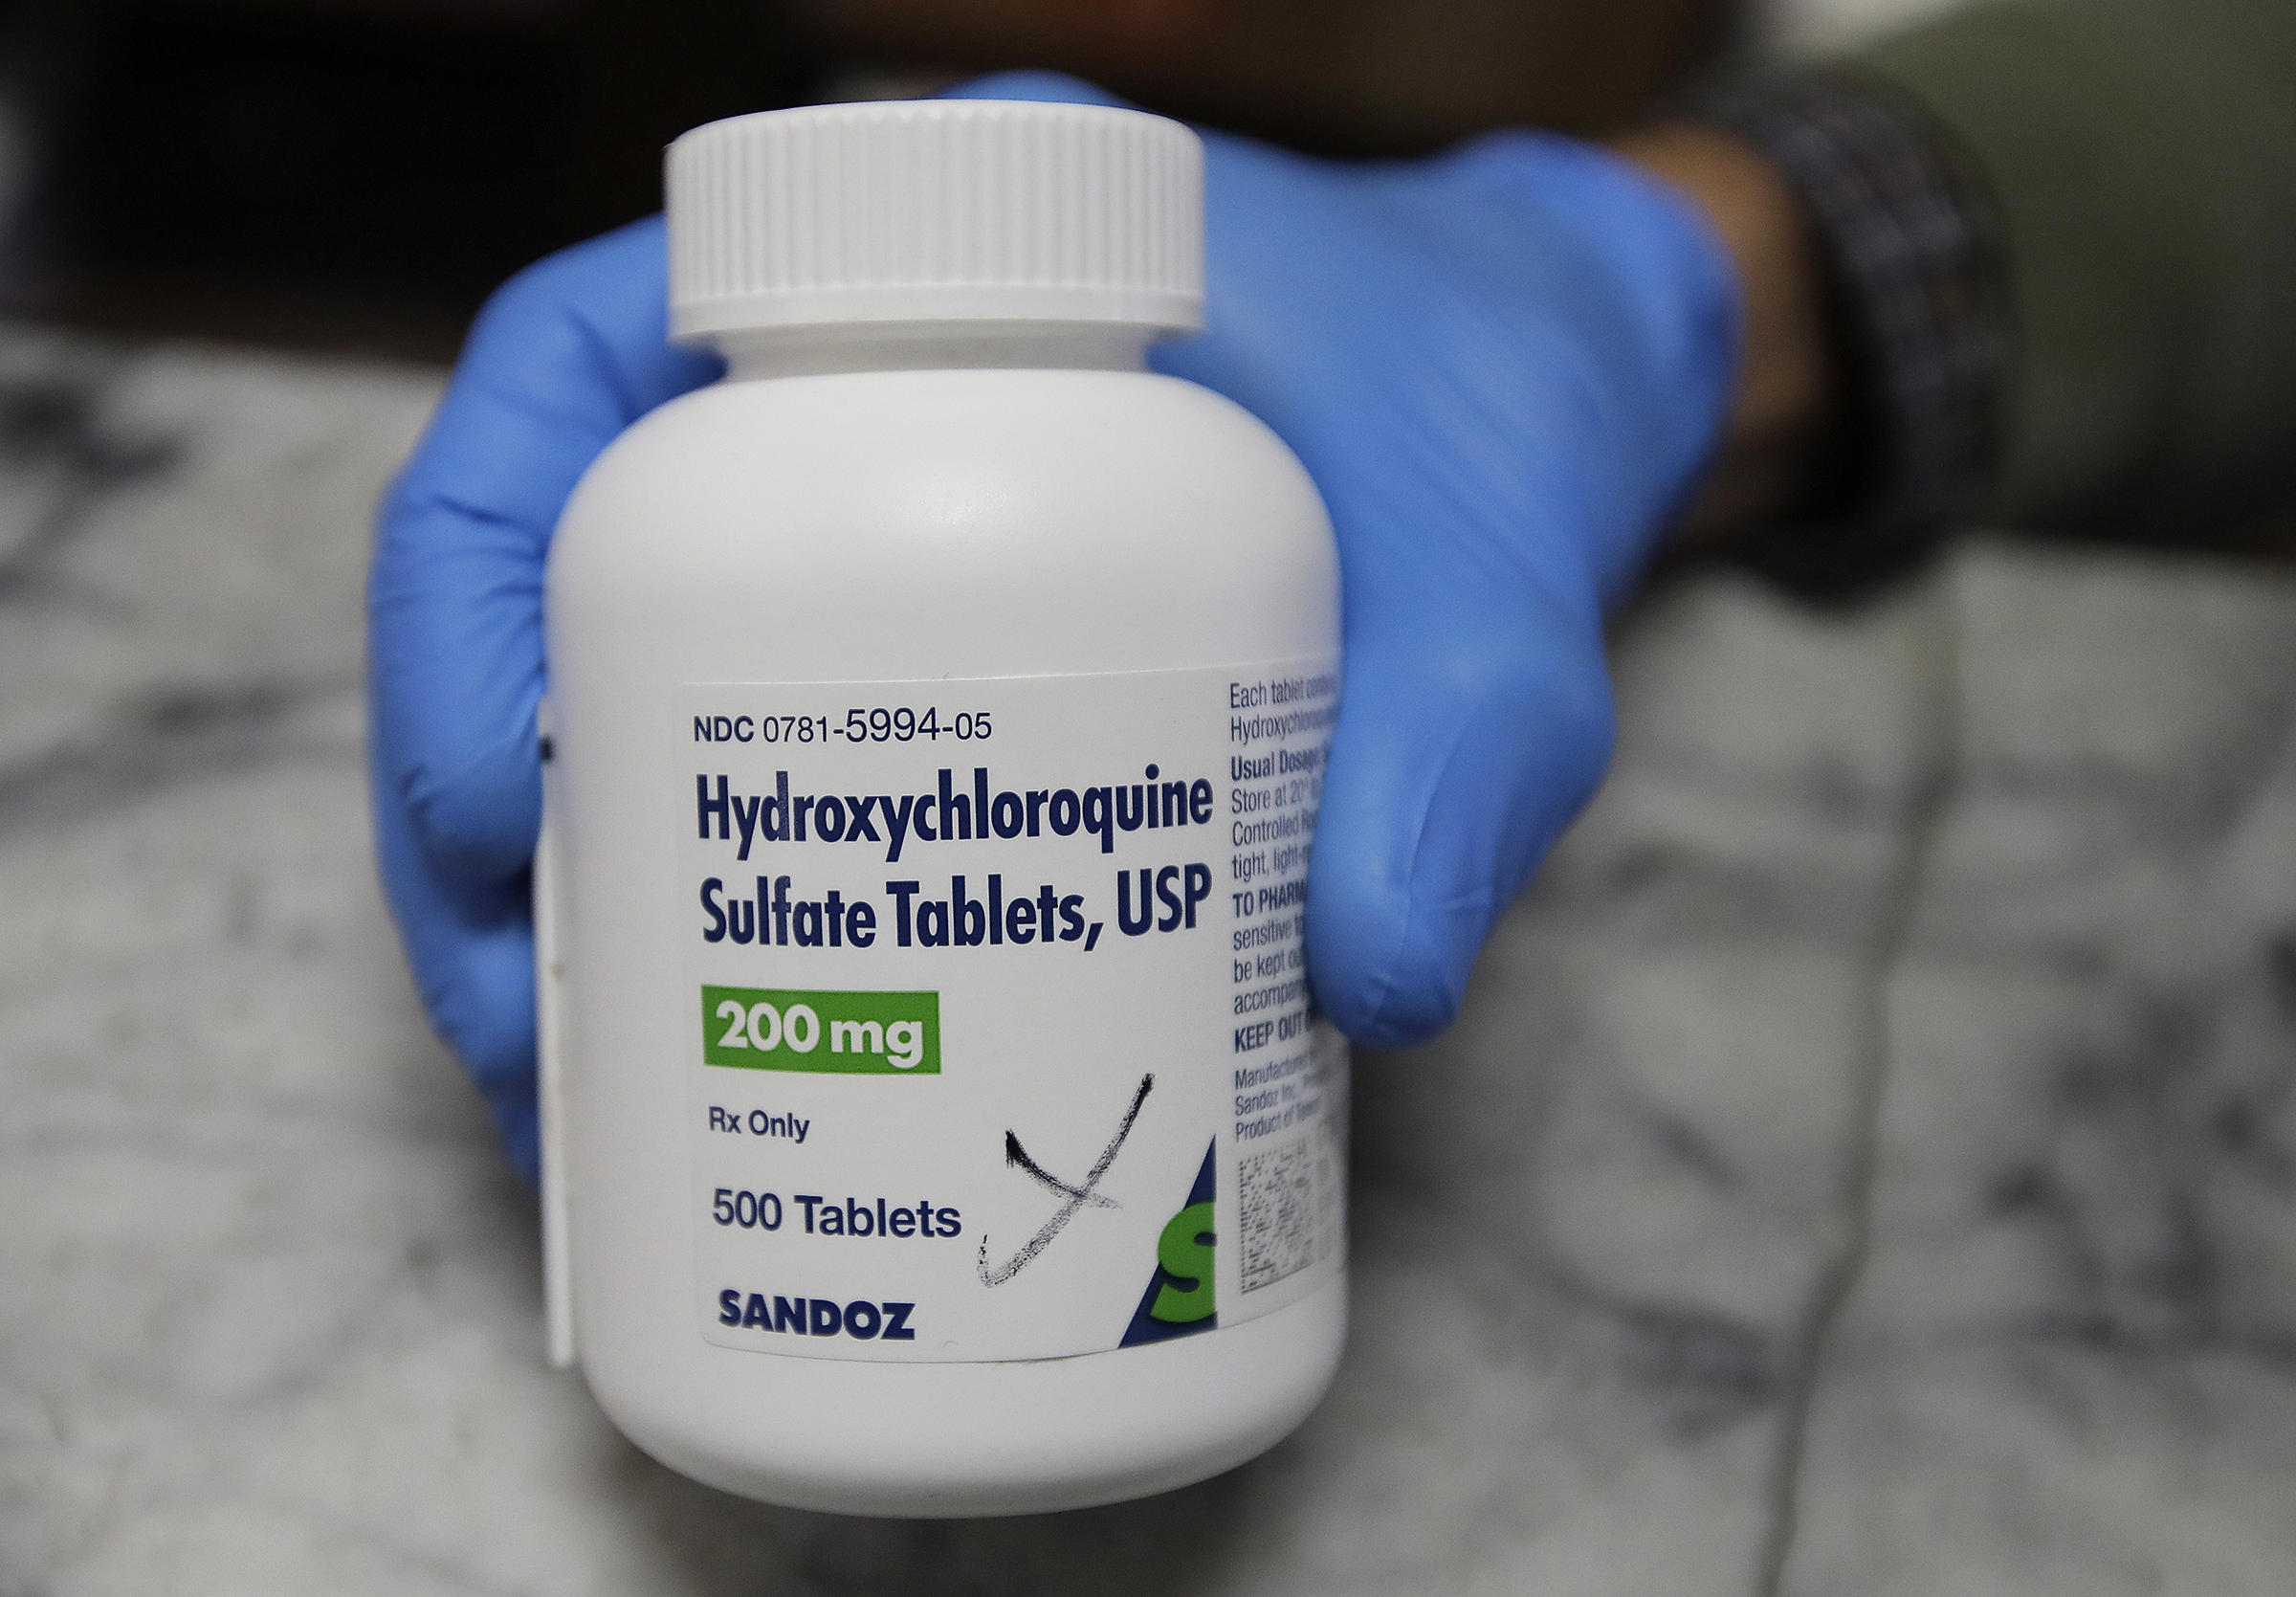 A pharmacist shows a bottle of the drug hydroxychloroquine on April 6, 2020, in Oakland, Calif. (Ben Margot—AP)